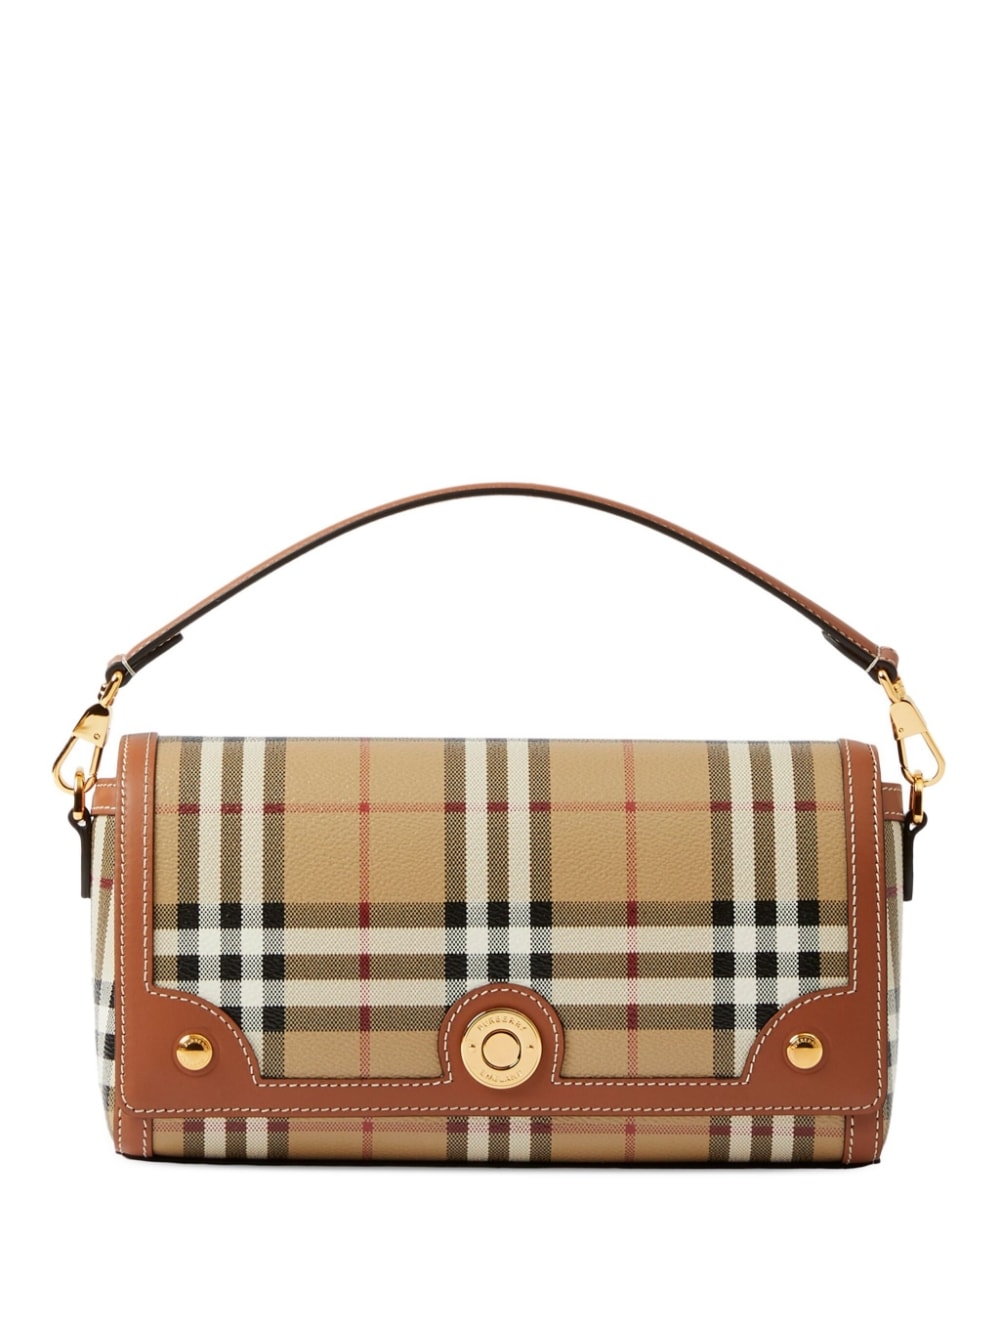 BURBERRY Elegant Brown Leather and Check Handbag for Women